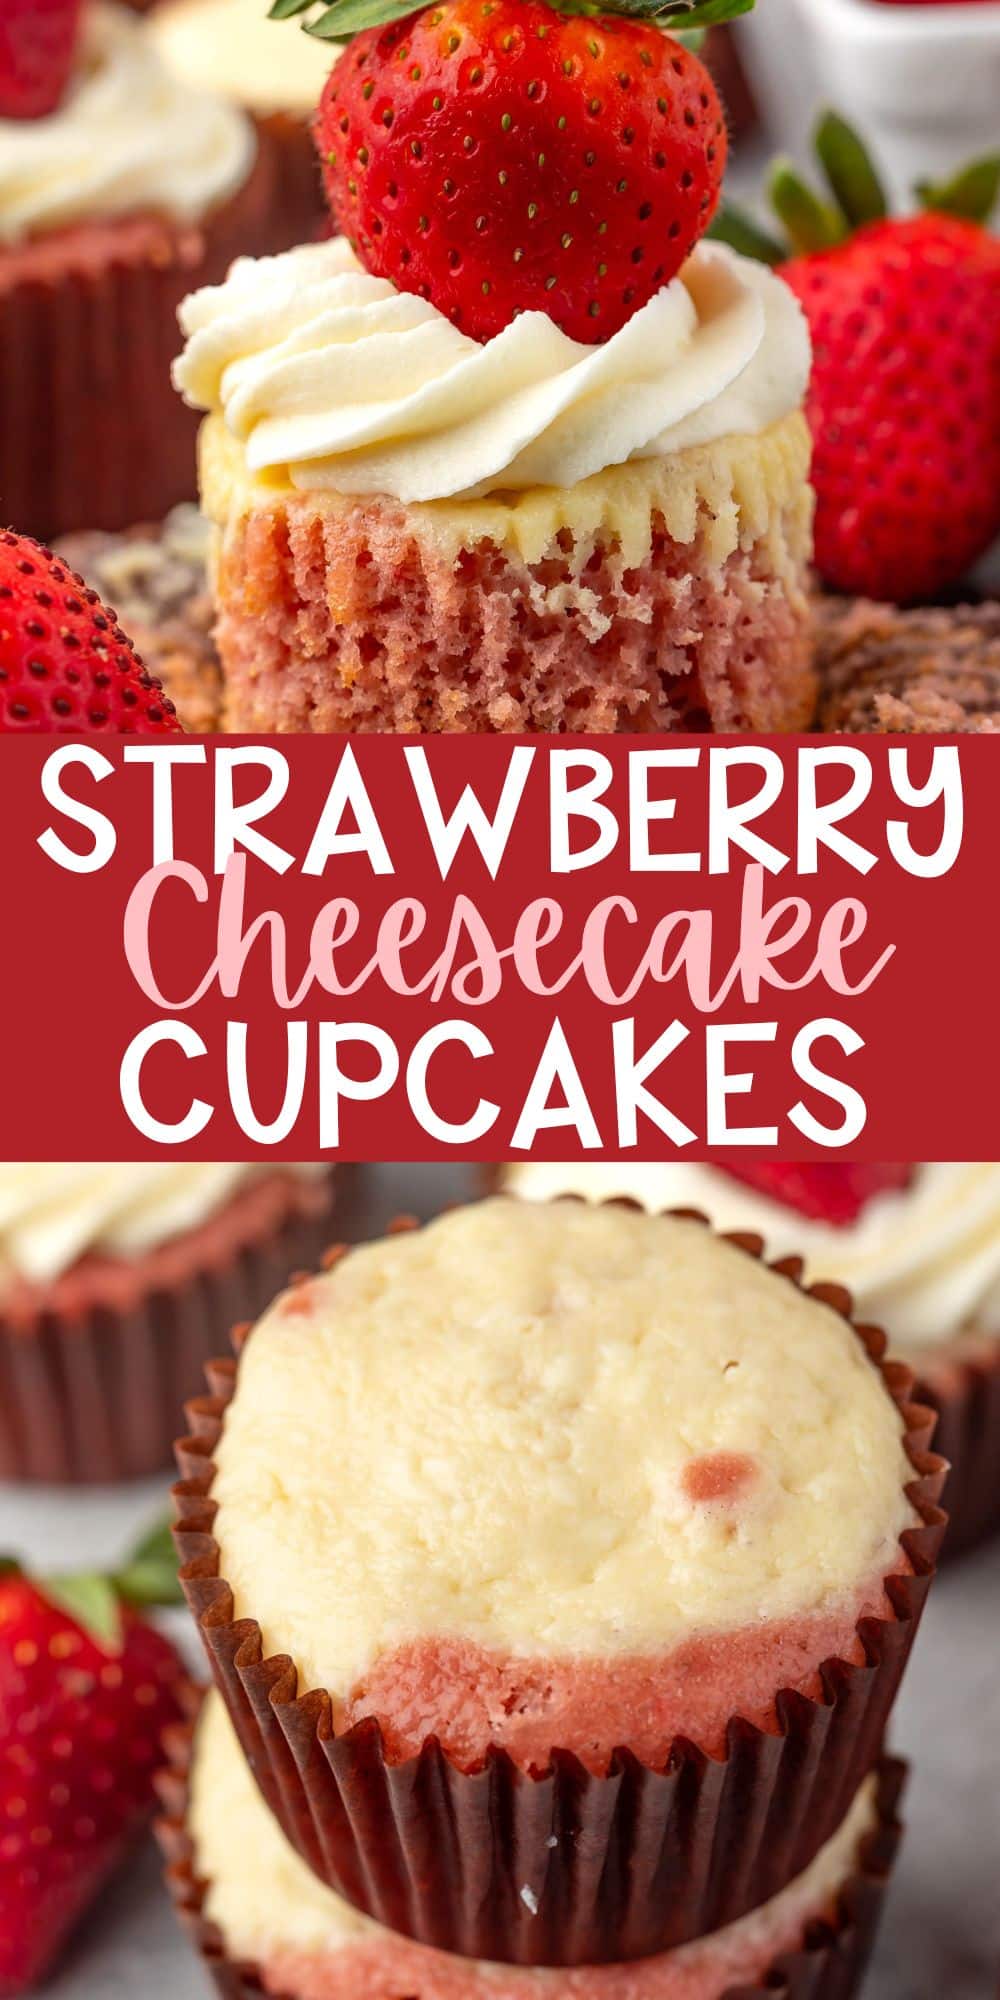 two photos of cupcake with white frosting and a strawberry on top with words on the image.